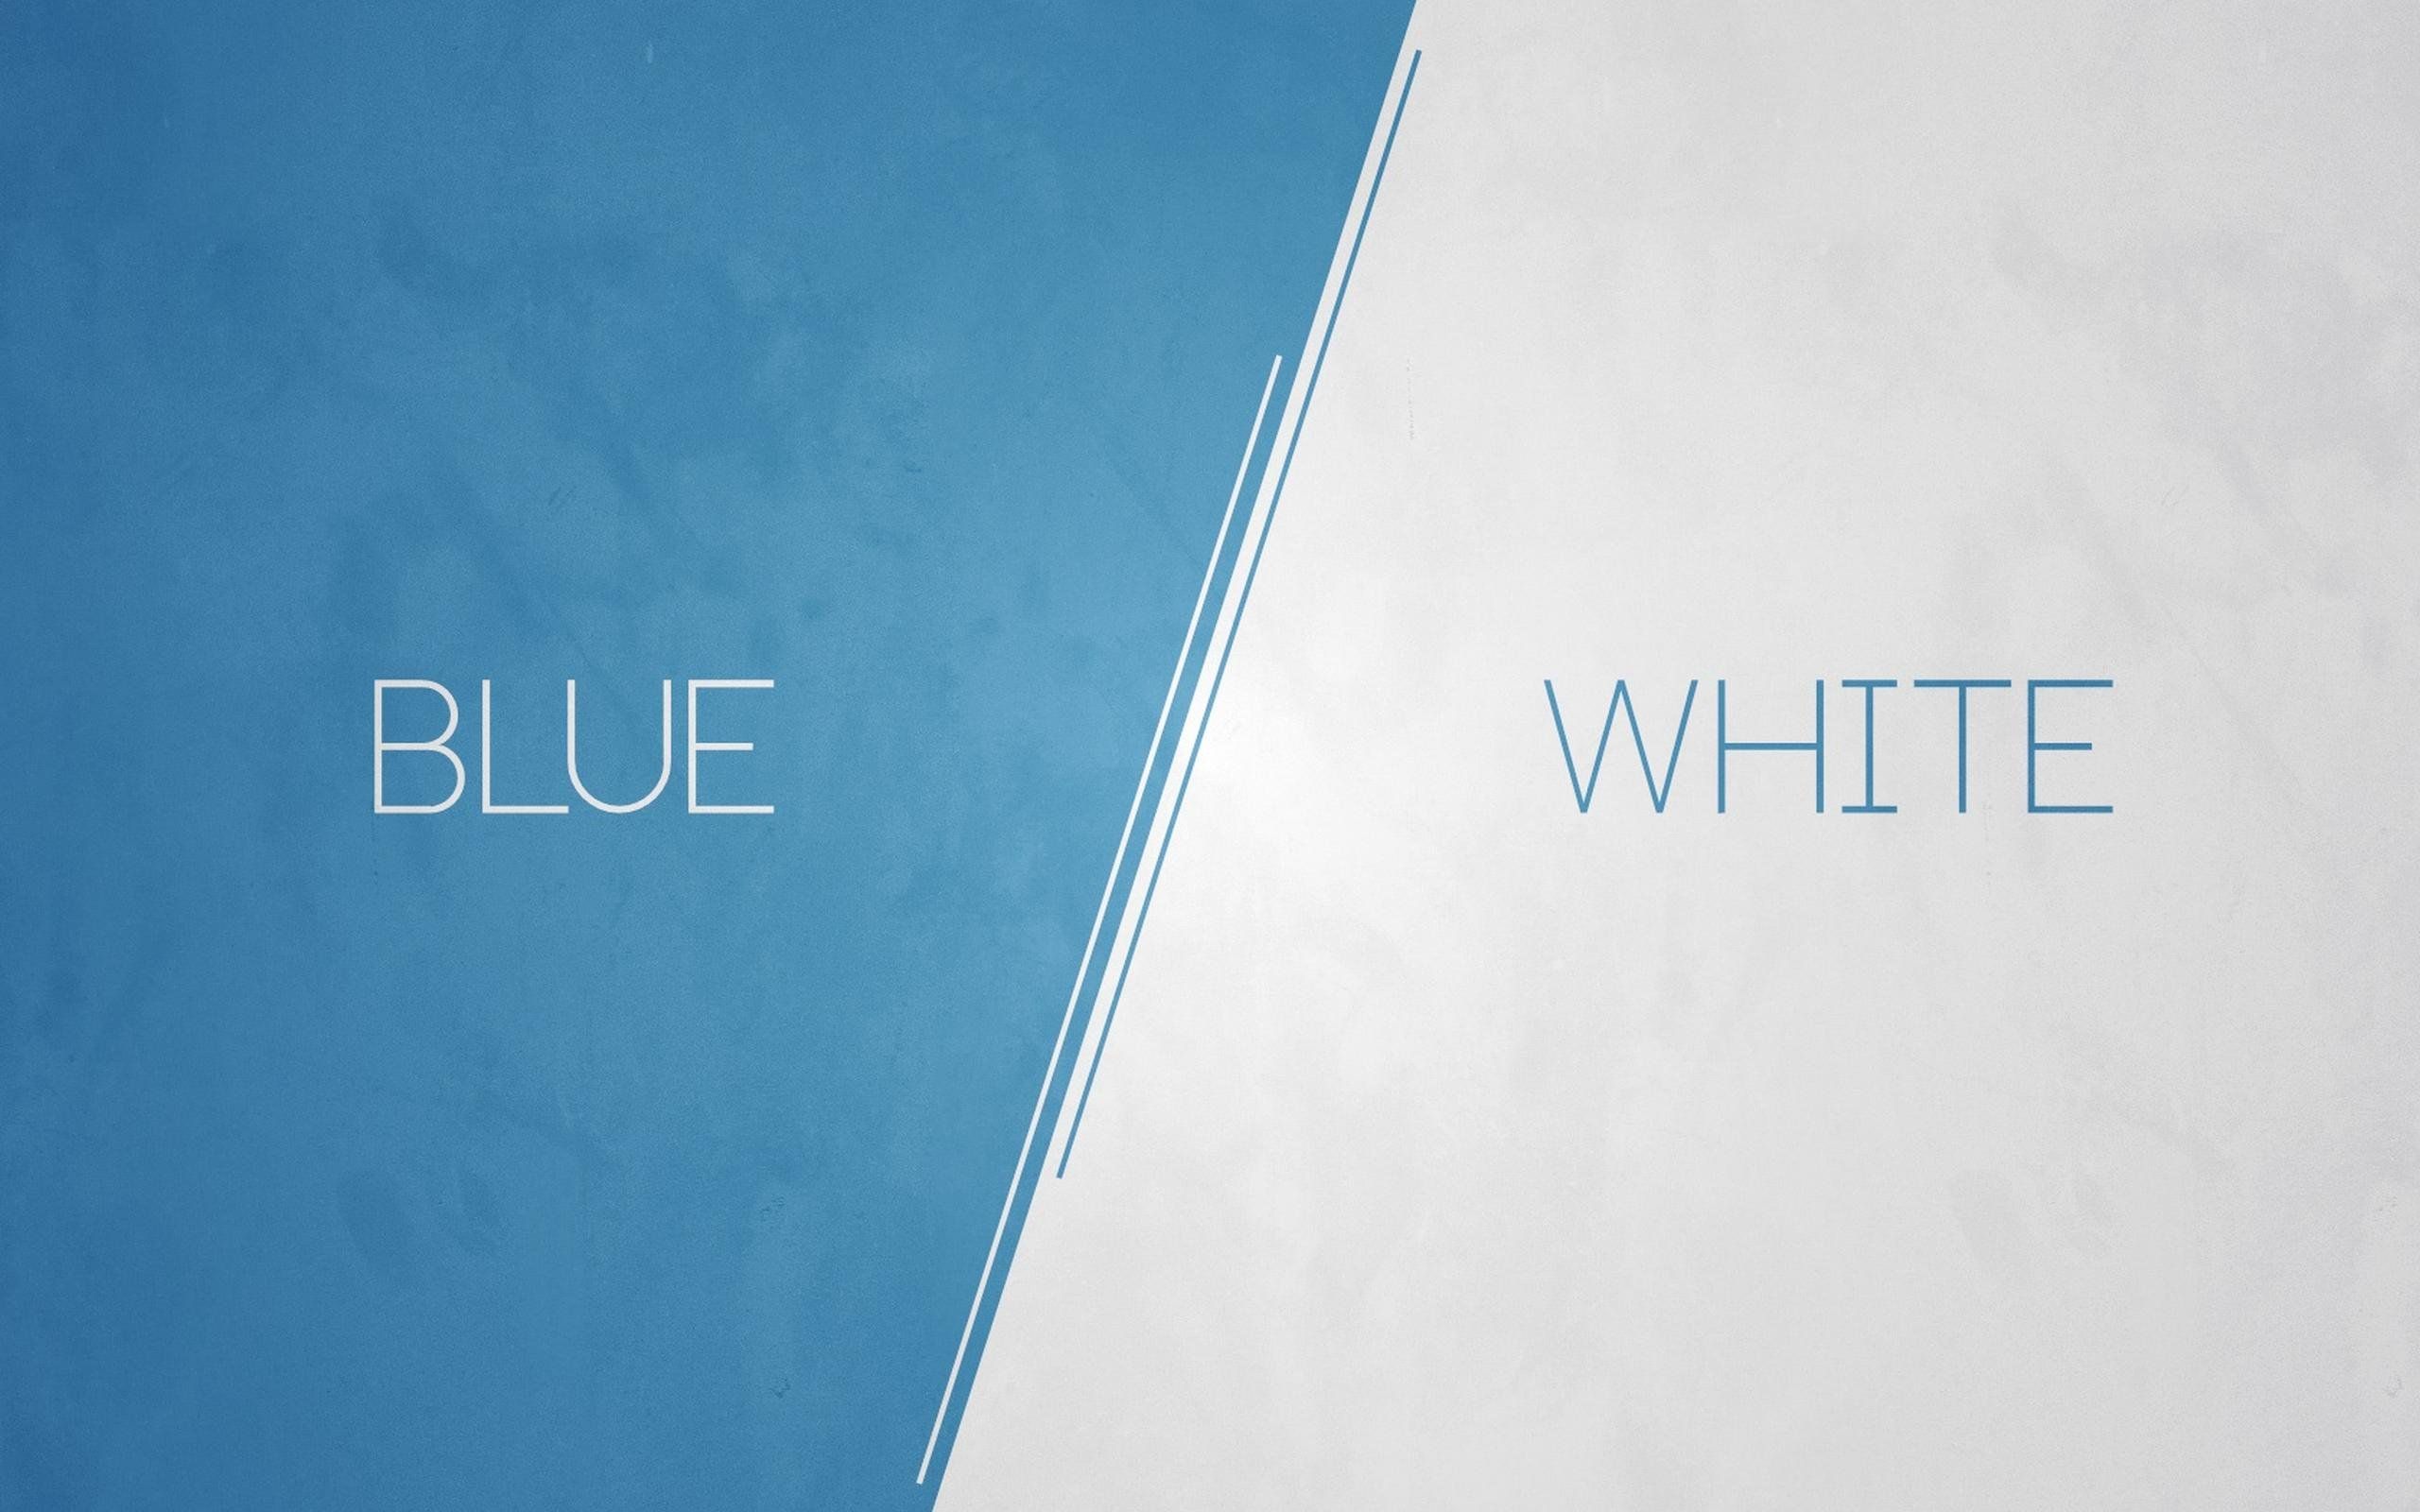 Bluewhite 4K wallpaper for your desktop or mobile screen free and easy to download